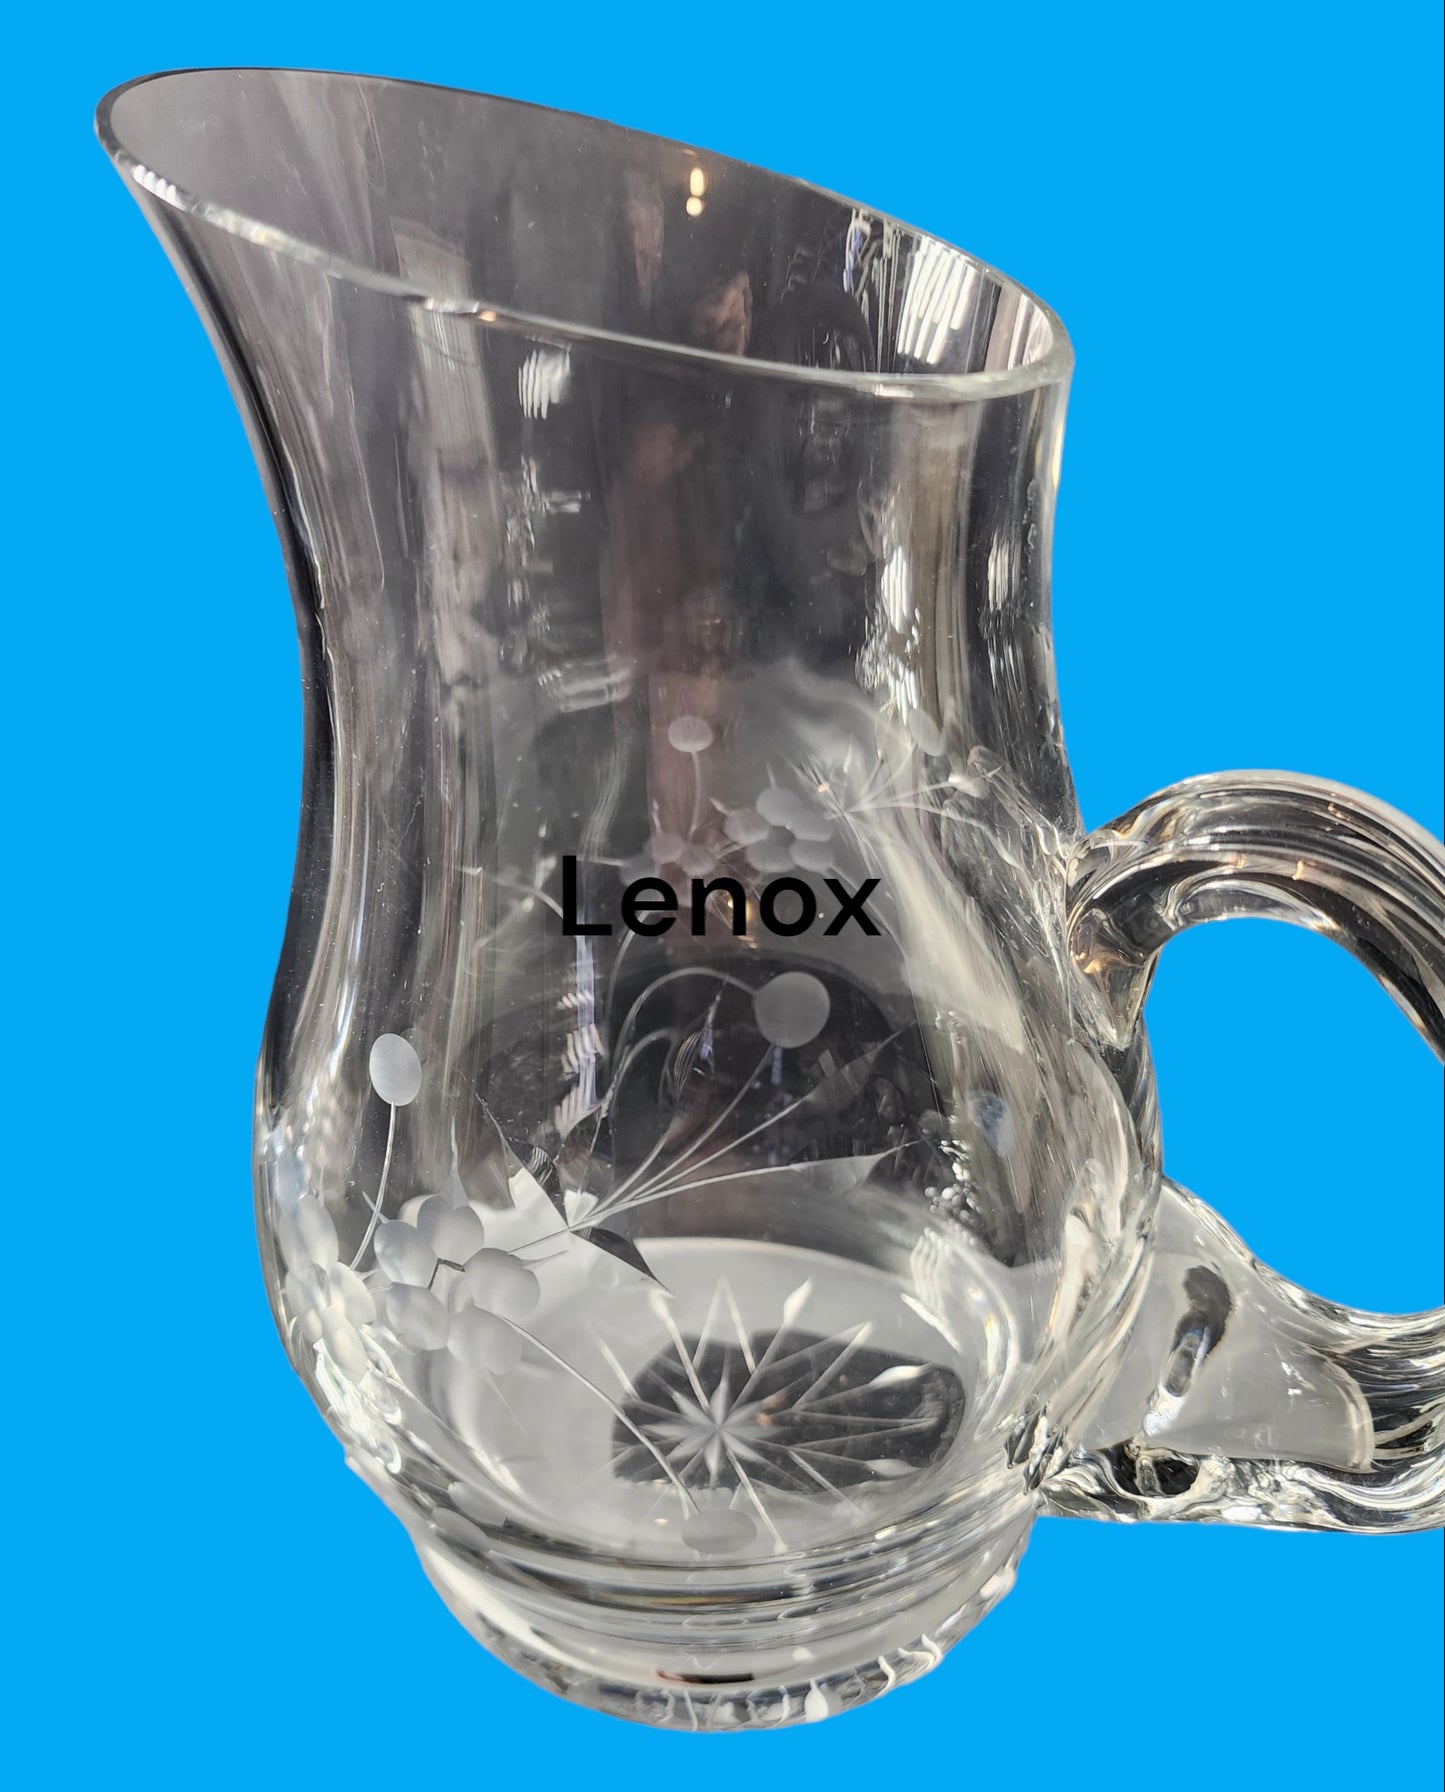 Lenox hand Cut glass Crystal pitcher Made in USA